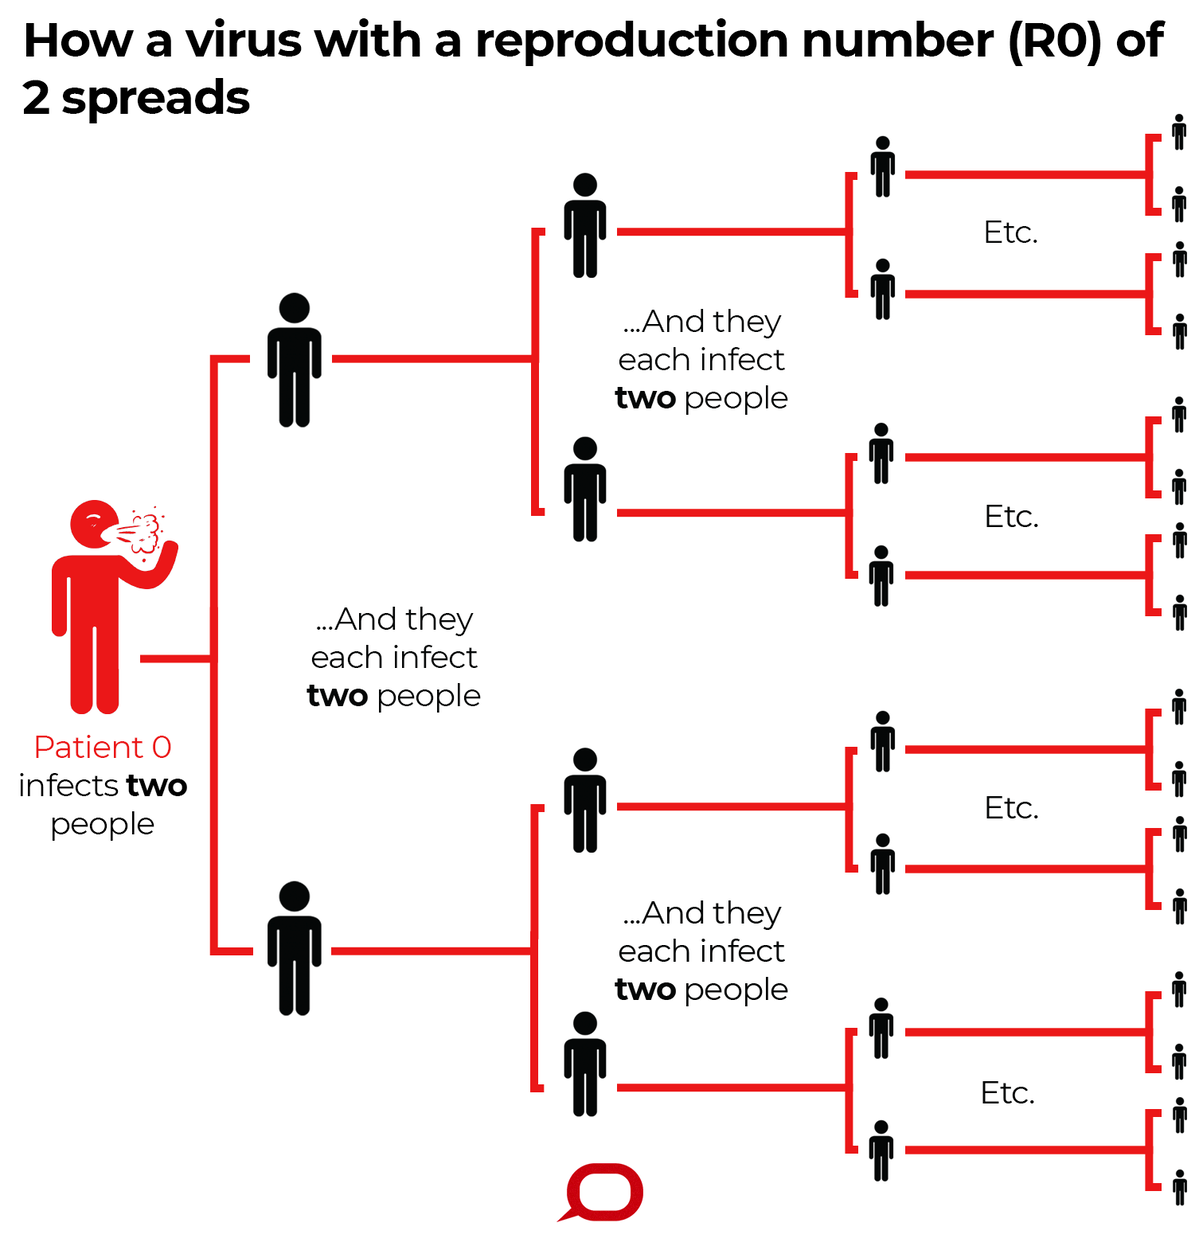 How the virus spreads